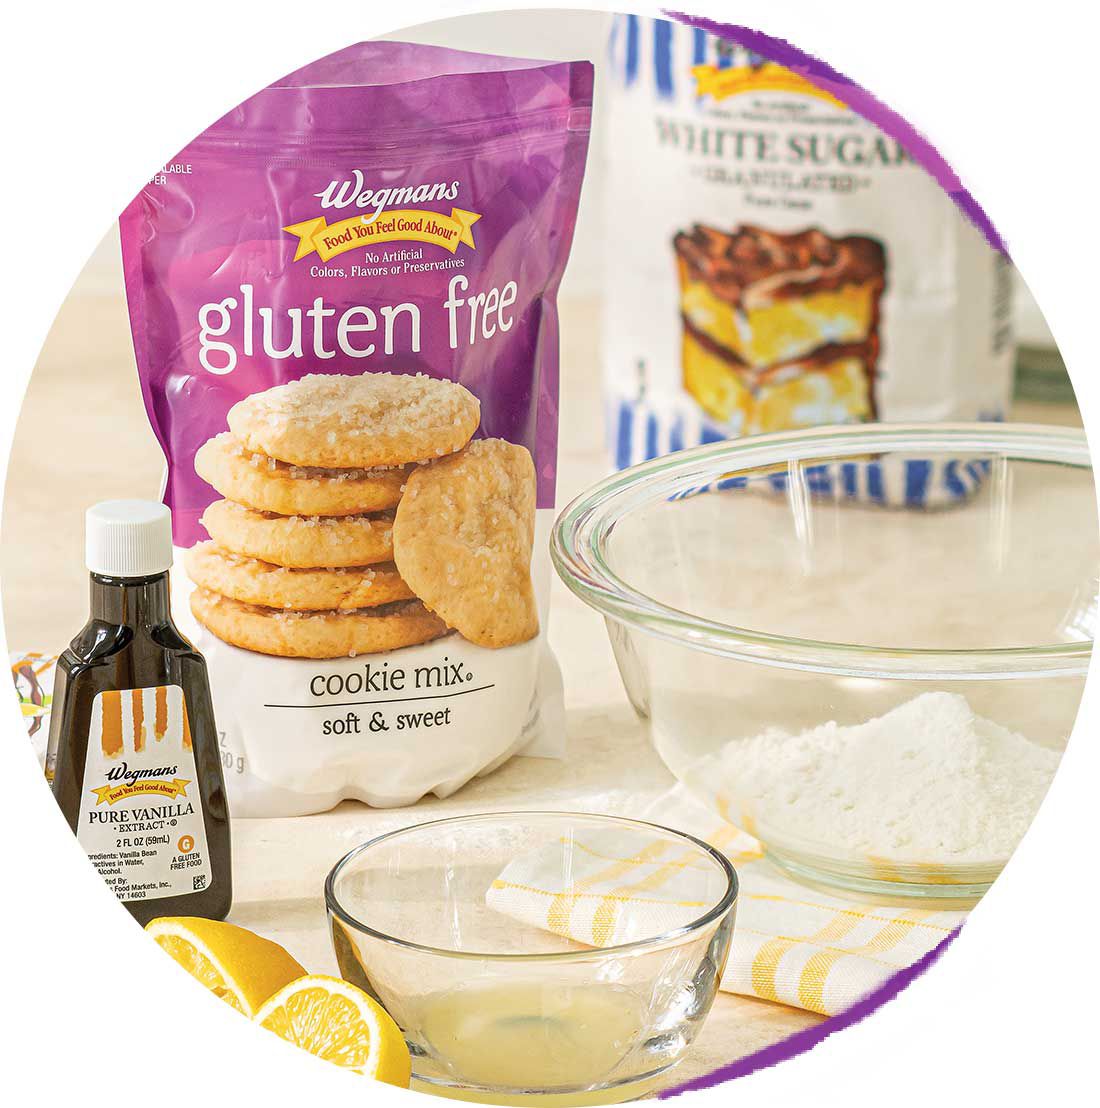 Gluten free products in a recipe